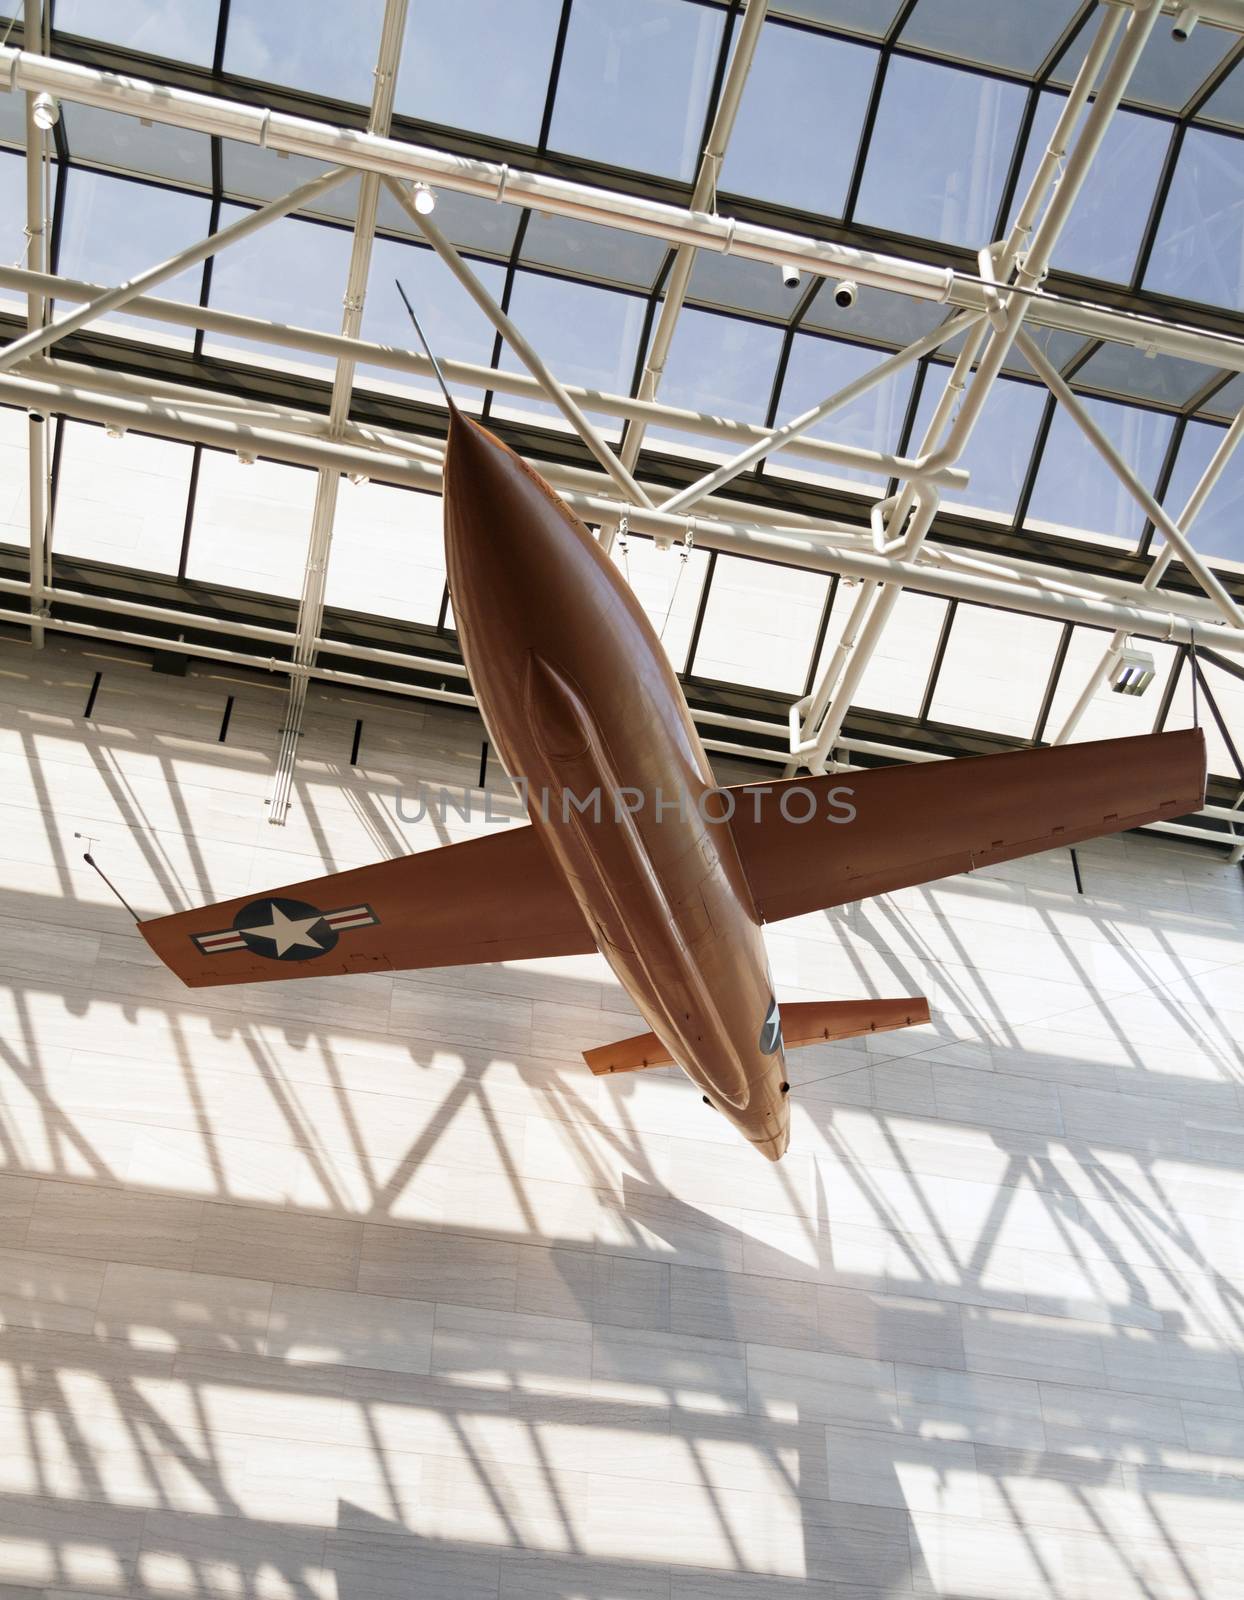 Bell X-1 Airplane by Moonb007